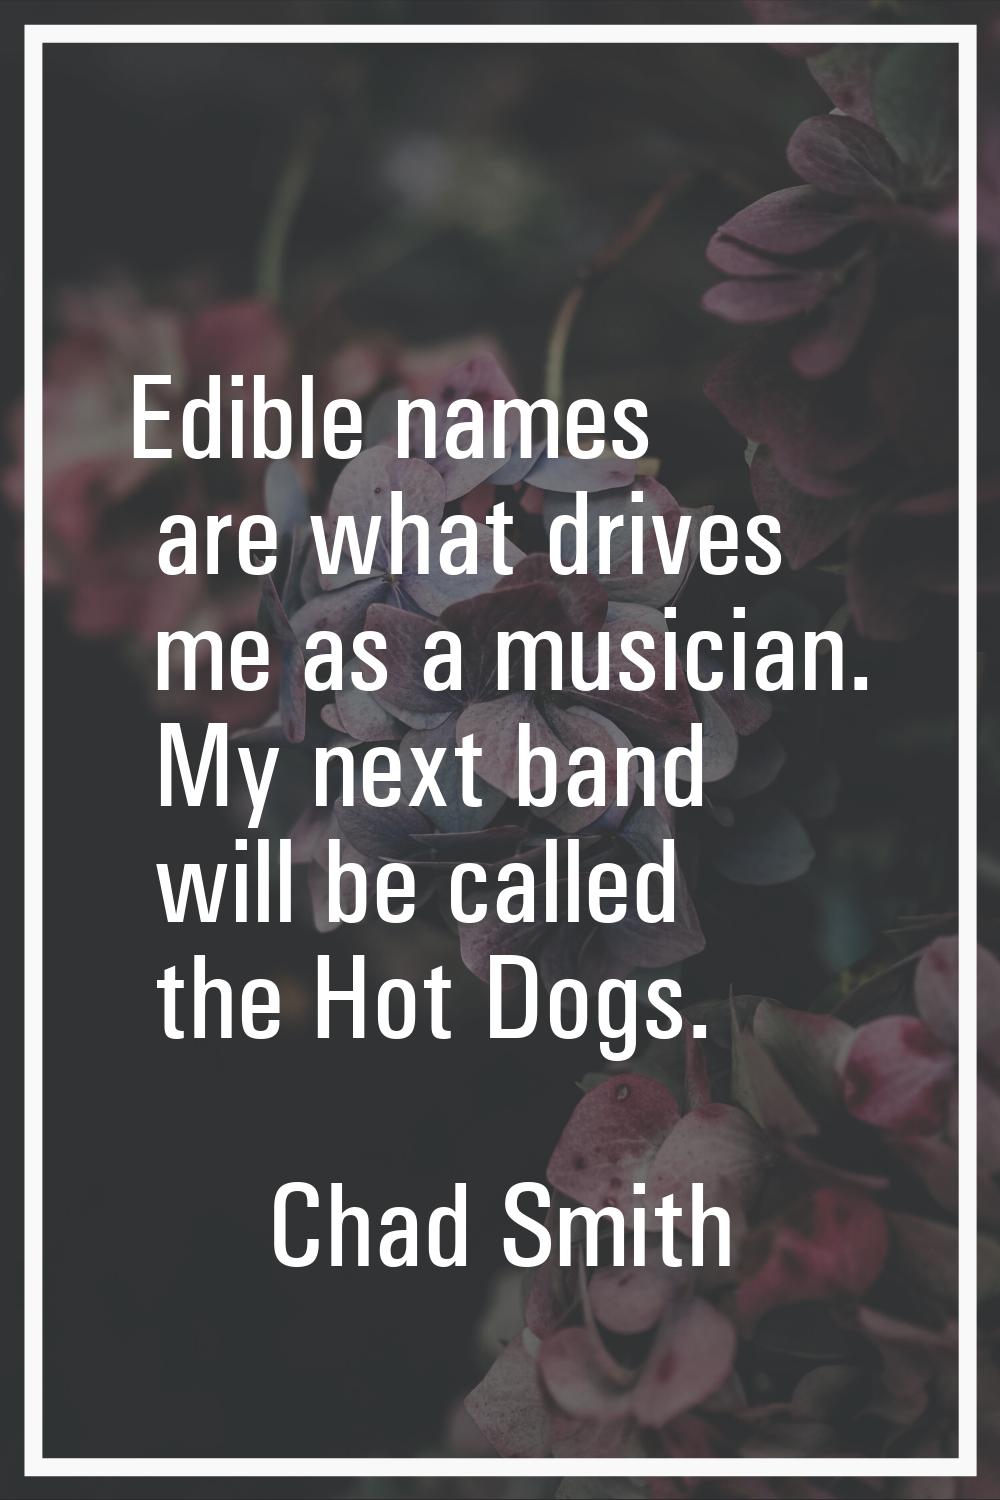 Edible names are what drives me as a musician. My next band will be called the Hot Dogs.